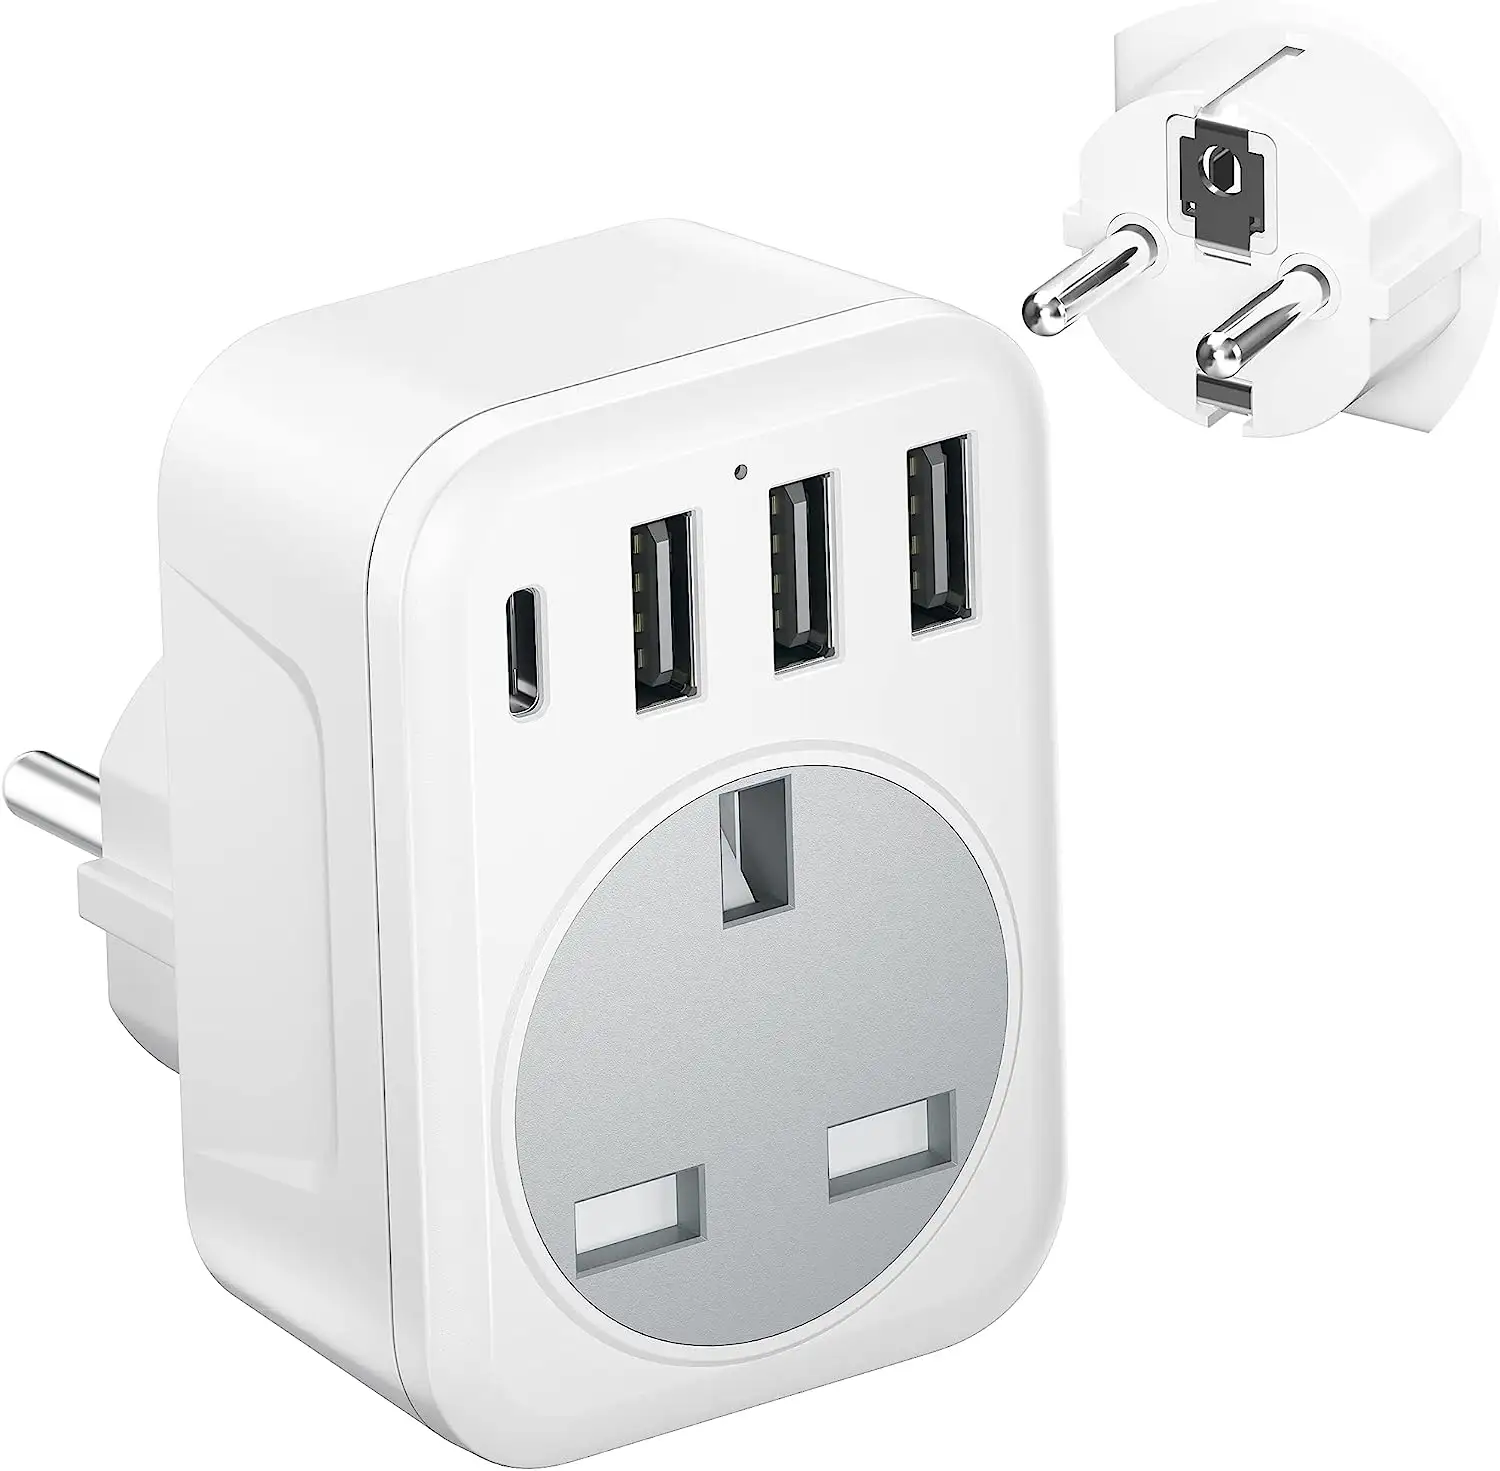 UK To European Plug Adapter Grounded European Travel Adapter With 3 USB-A 1 Type C Plug Adaptor